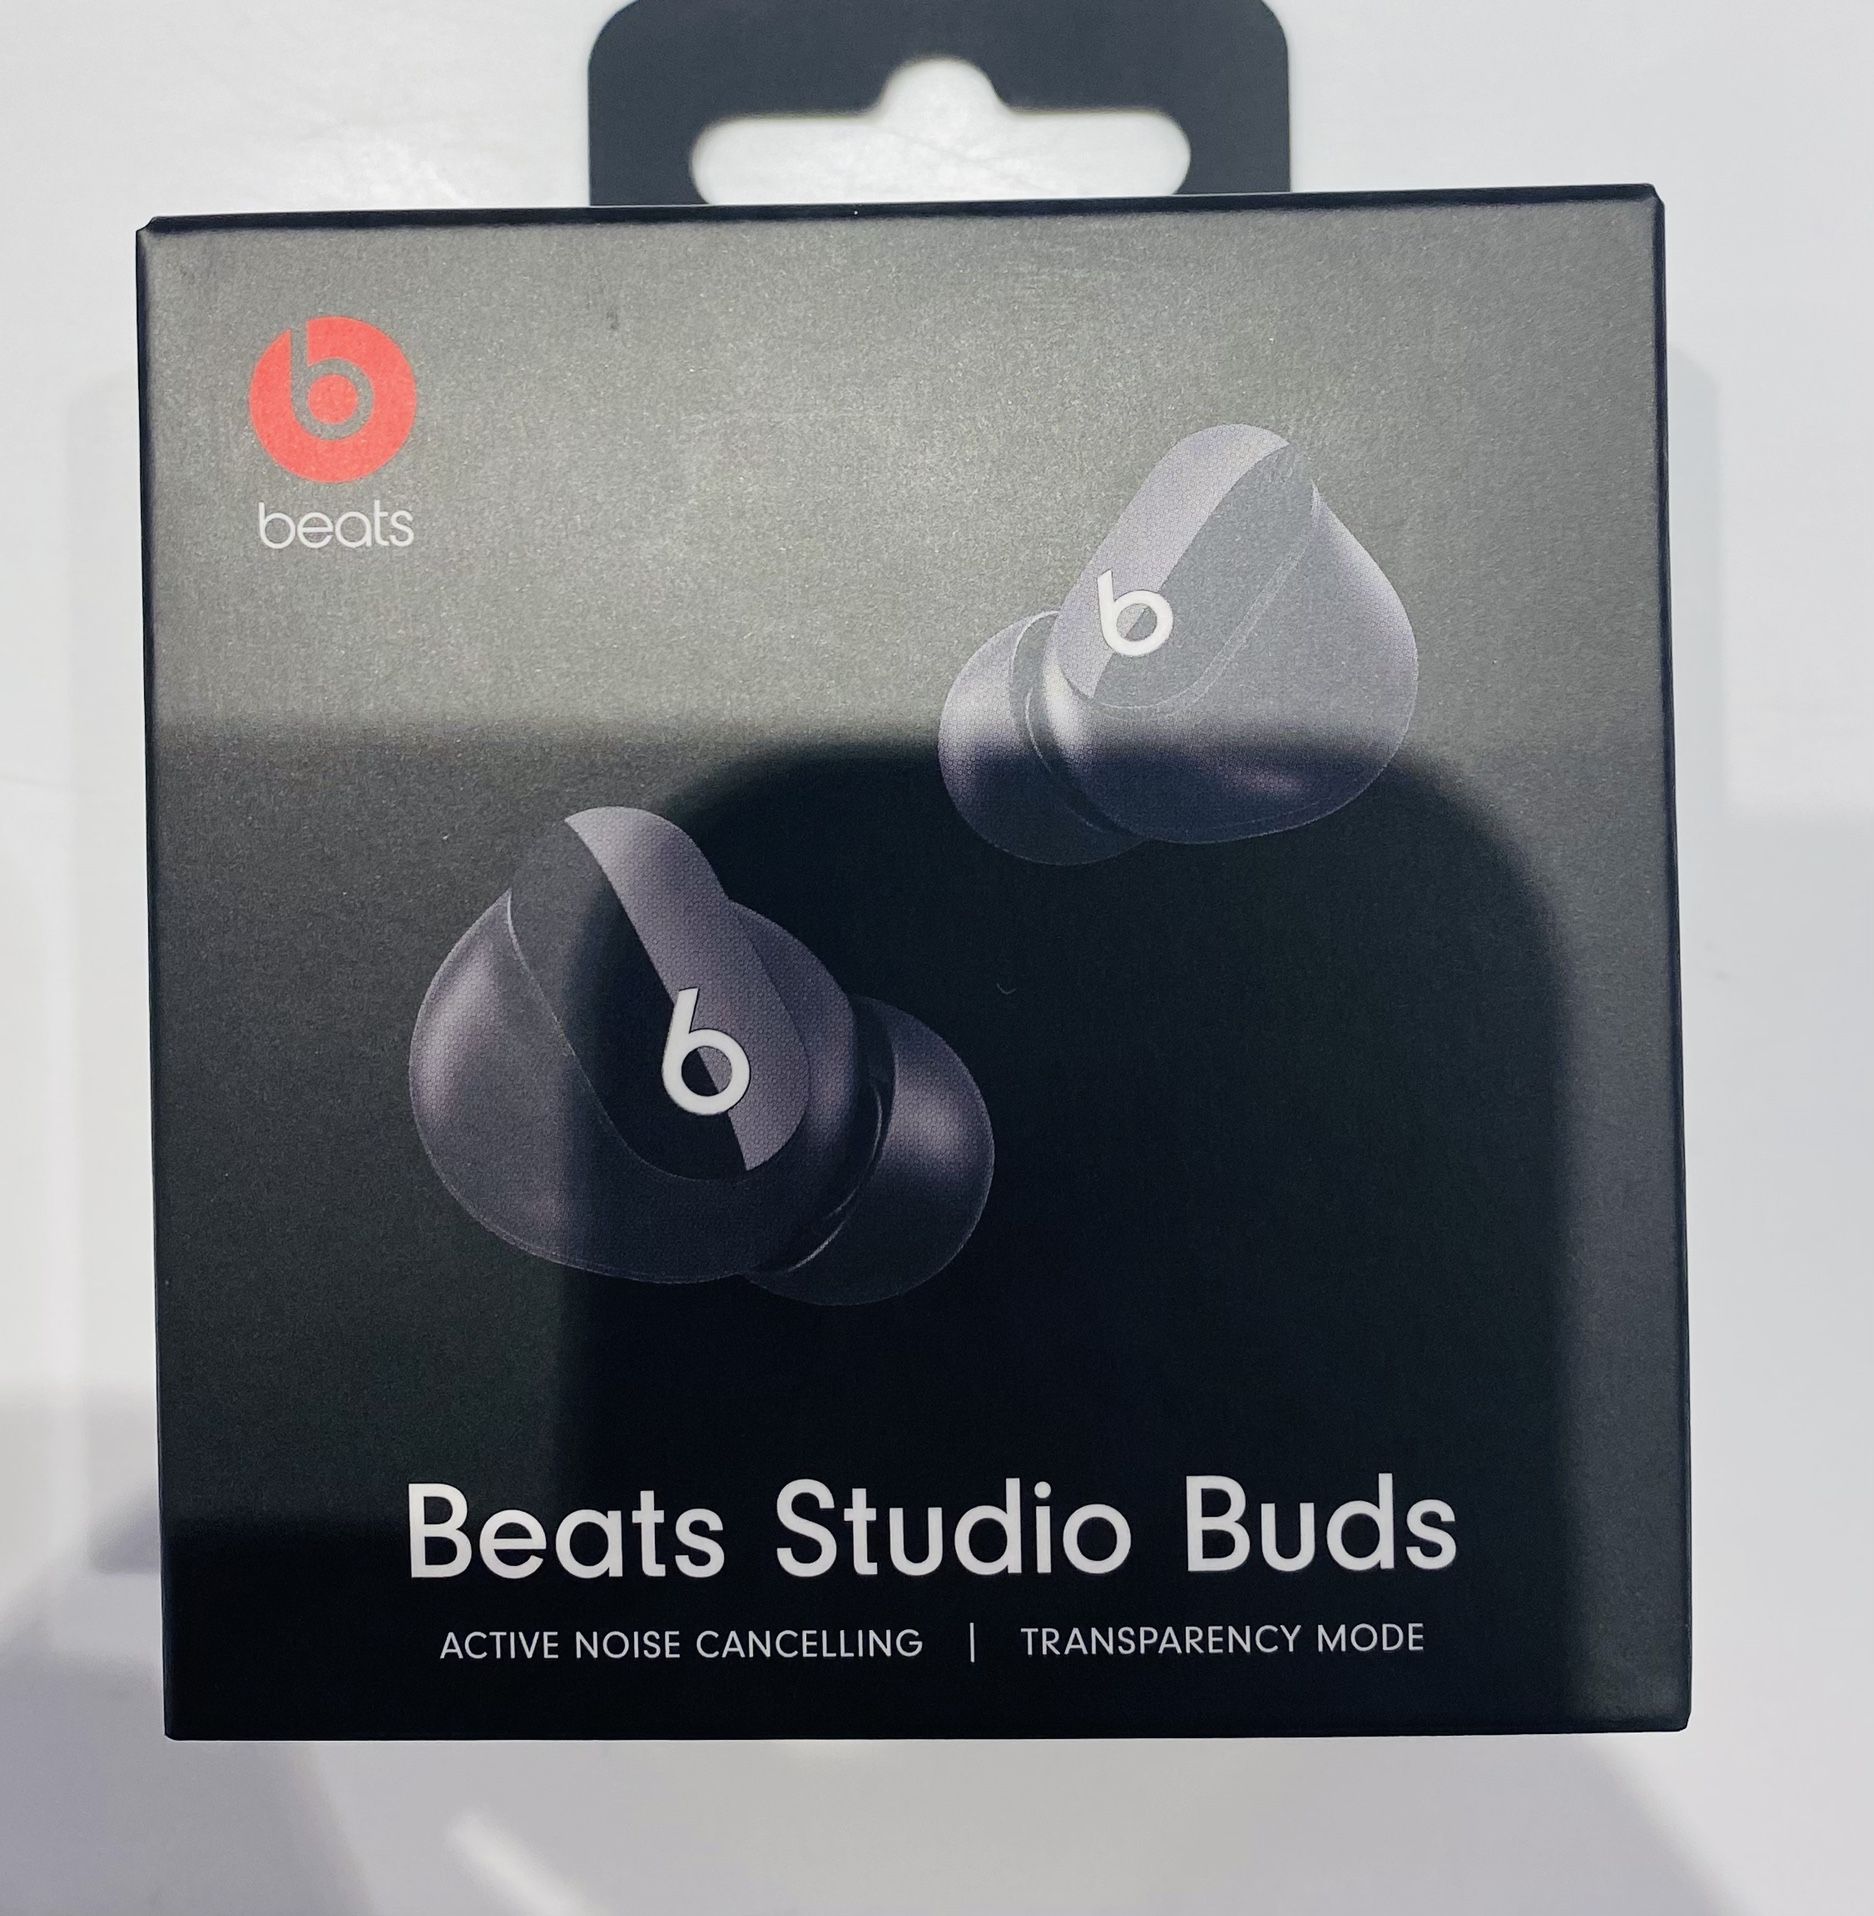 Beats by Dr. Dre - Beats Studio Buds Totally Wireless Noise Cancelling Earbuds - Black